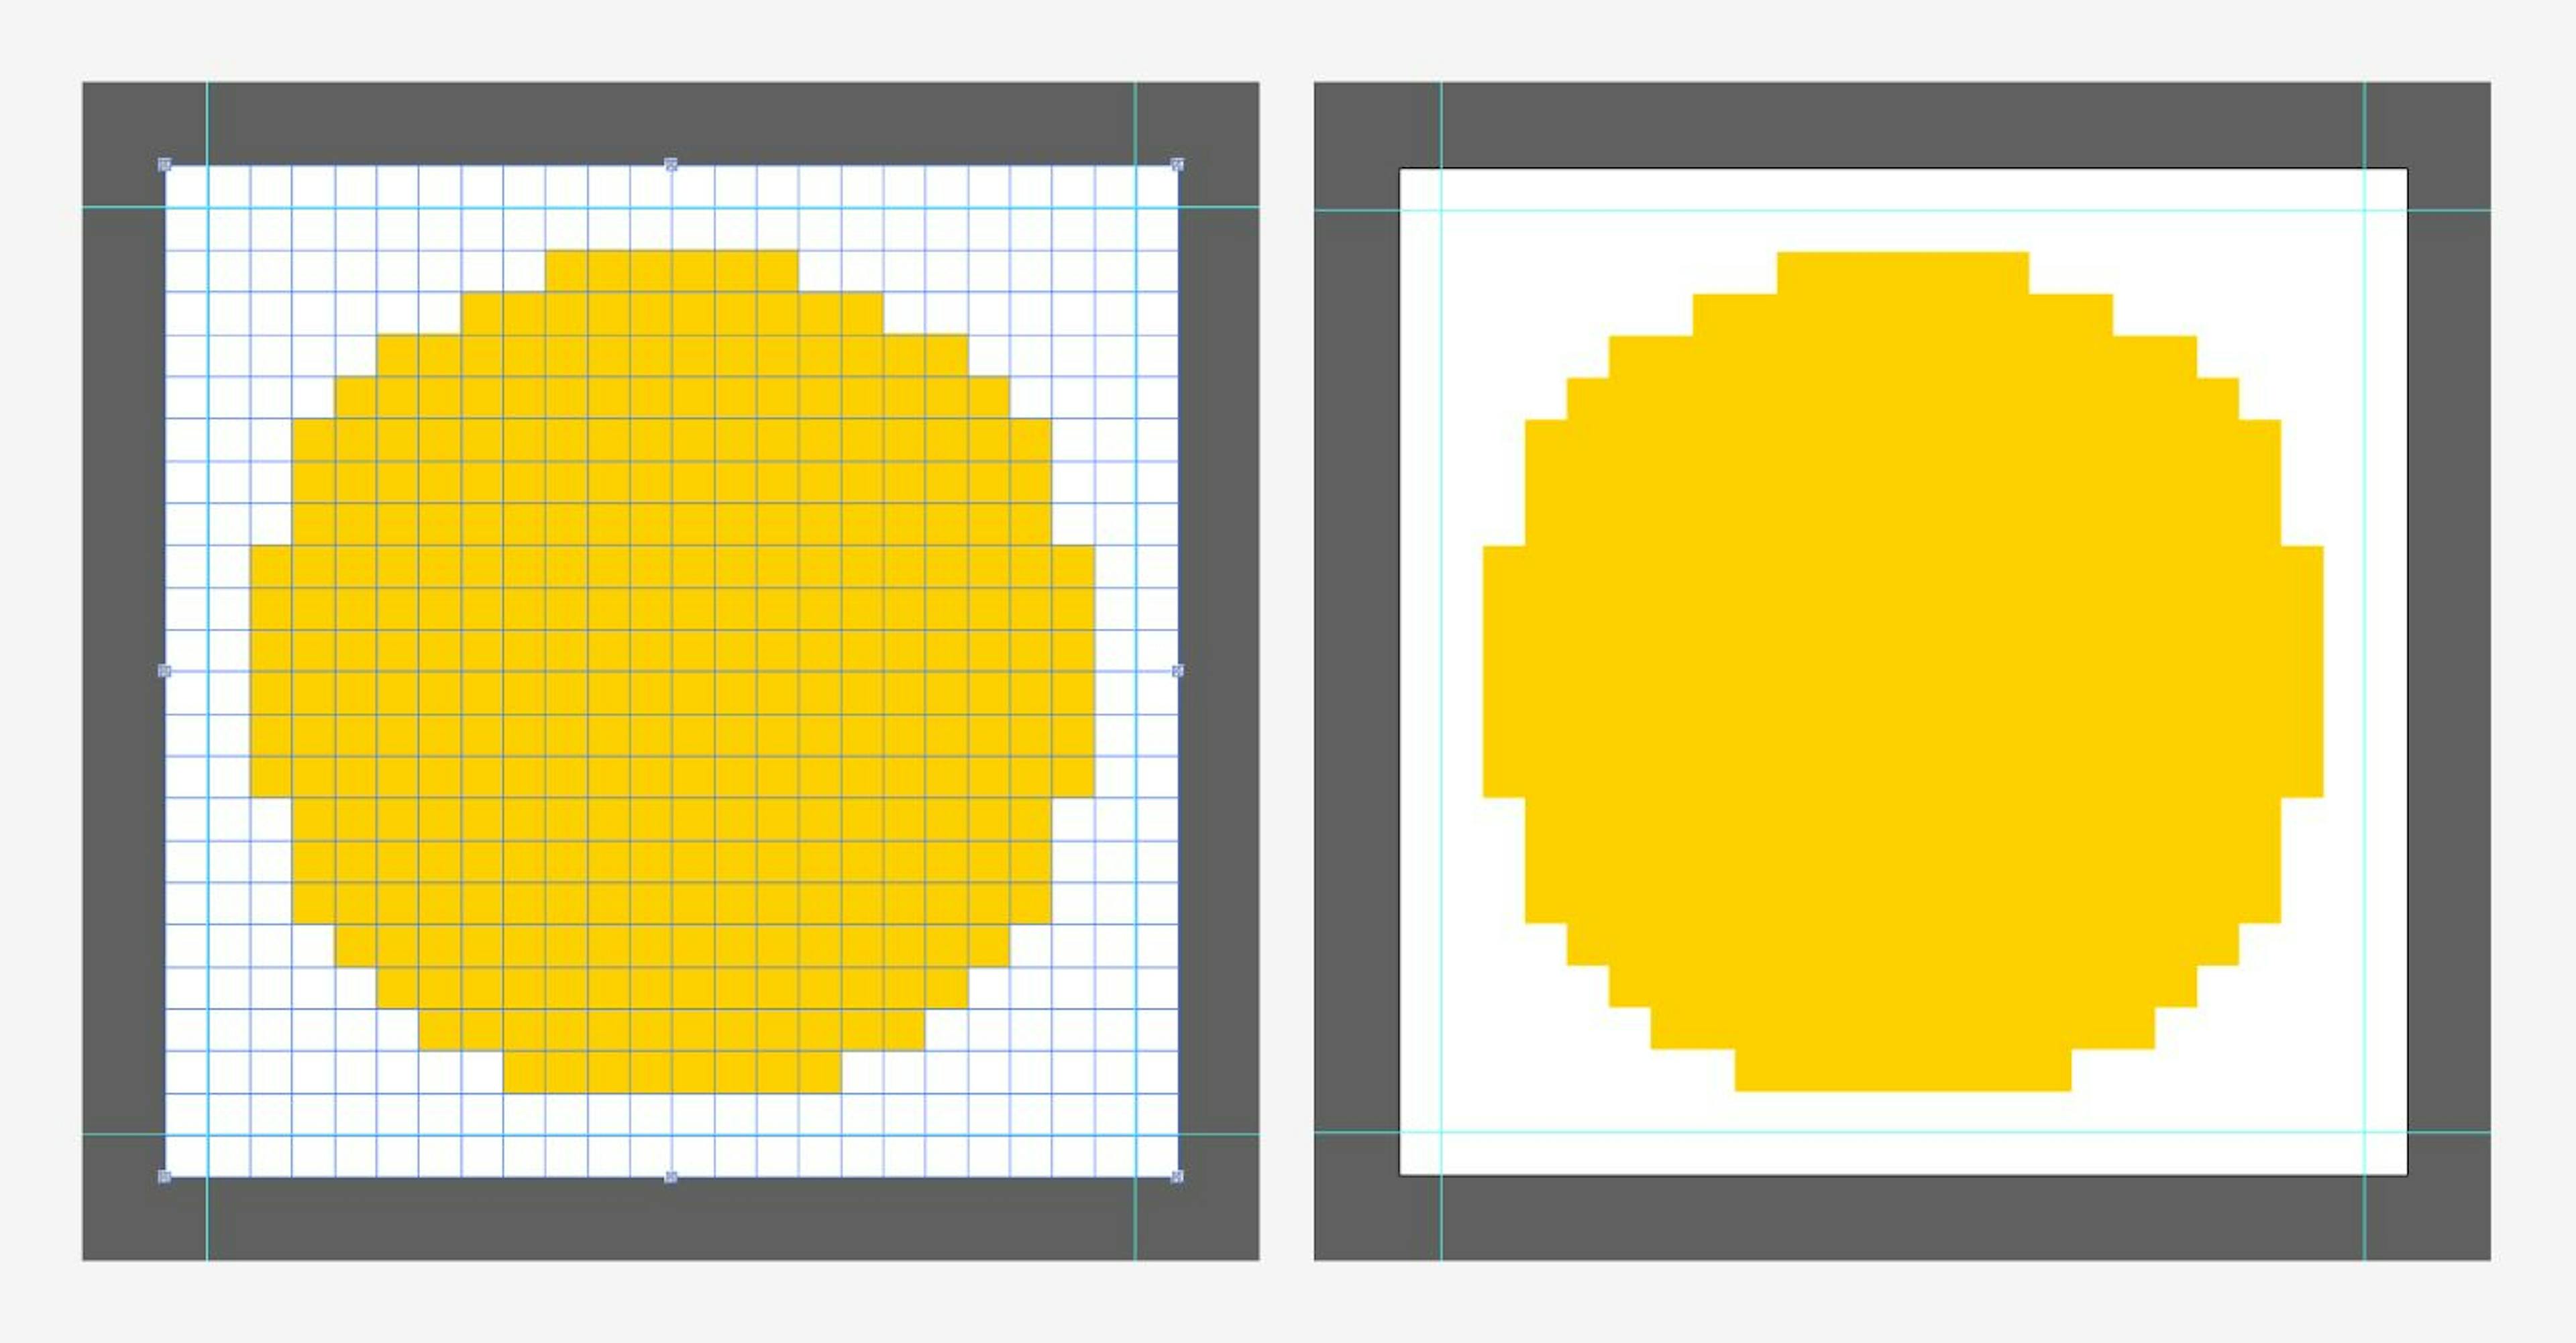 Started by drawing an ellipse on a 24 px grid